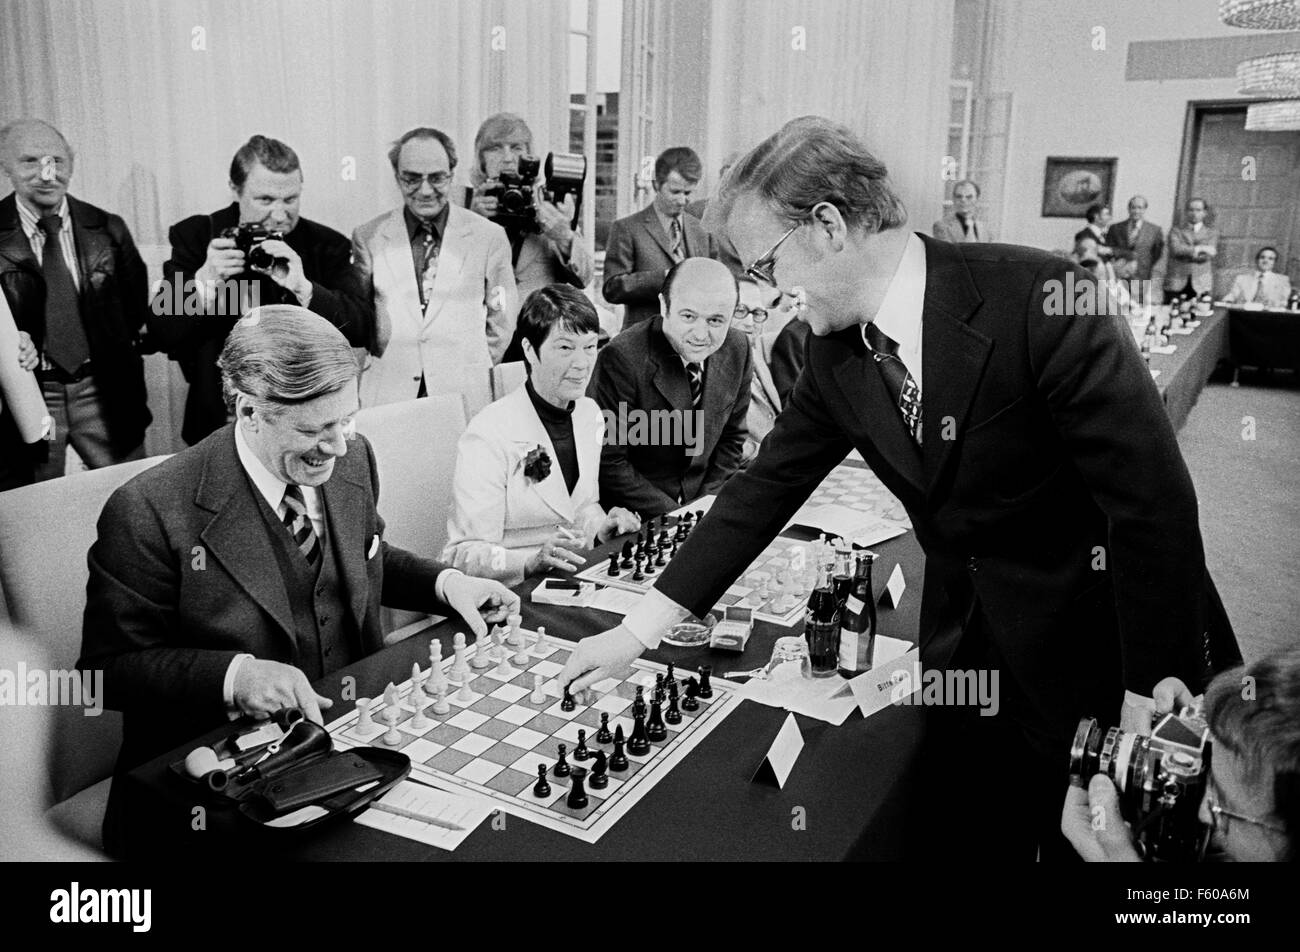 (L-R) Chancellor Helmut Schmidt, his wife Loki, state secretary Manfred Schüler and further 30 chess players take part in a simultaneous chess event against the international grandmaster Matthias Gerusel (R) on 29 April 1975. Stock Photo